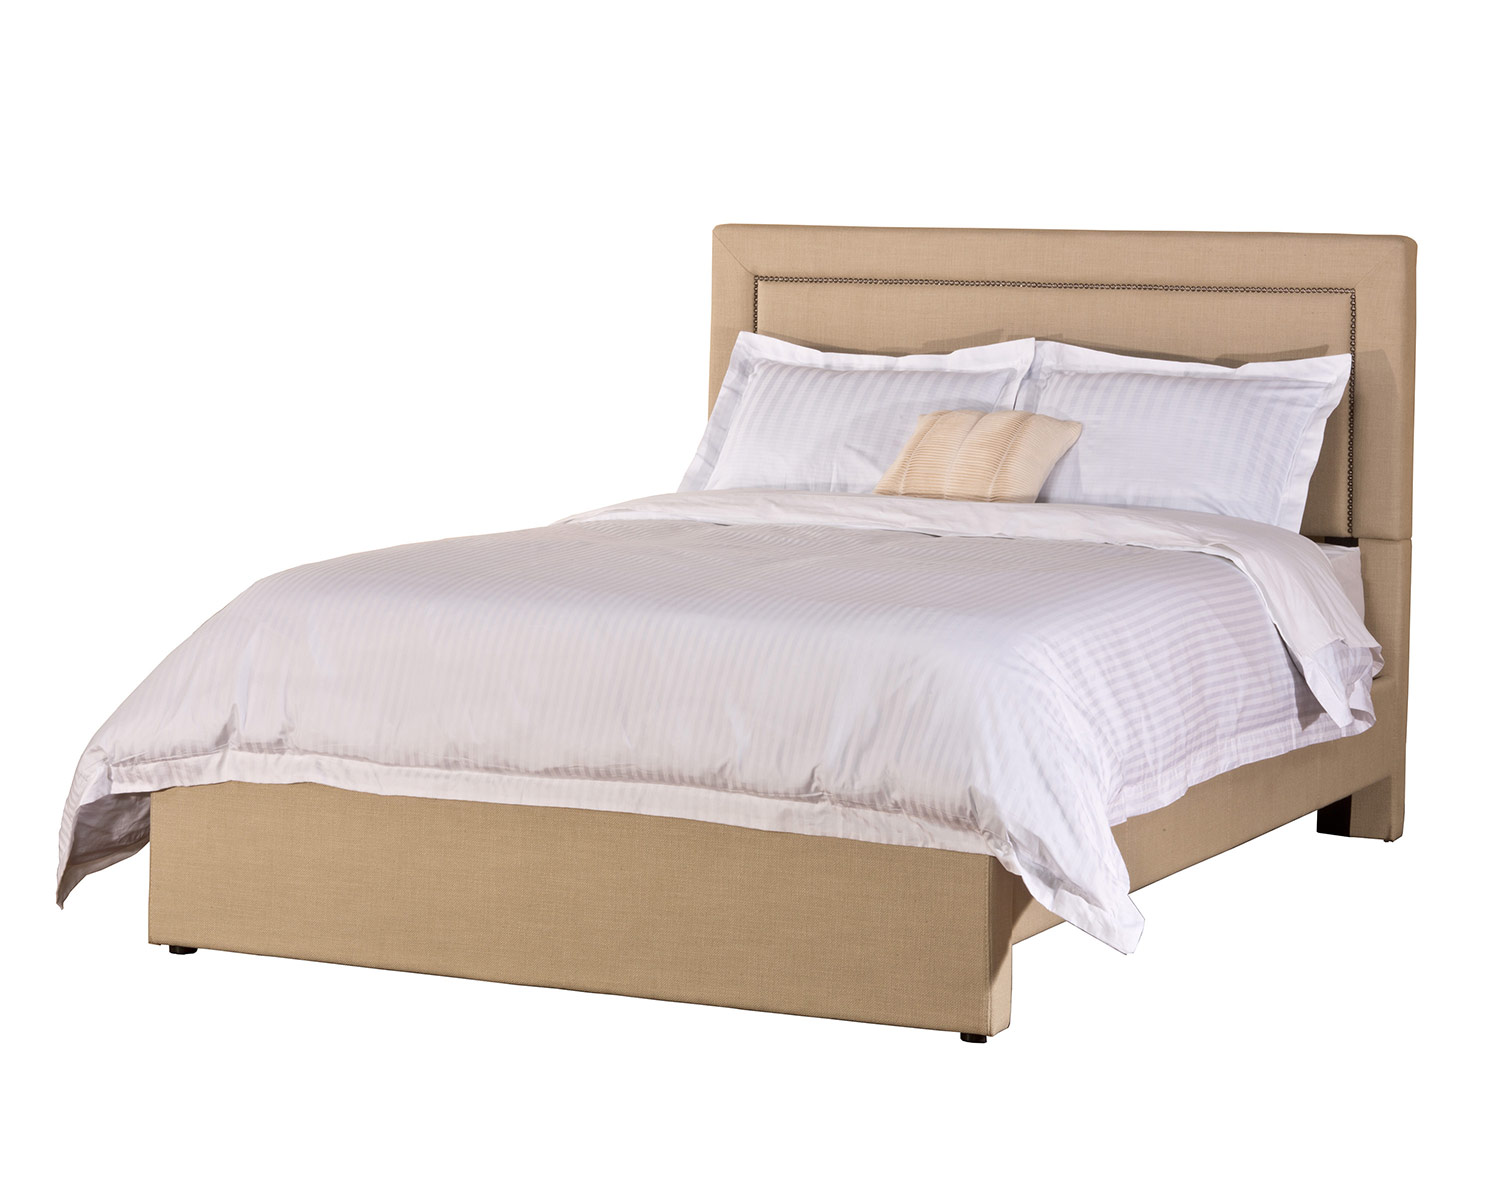 Hillsdale Claire Bed - Soft Beige Fabric